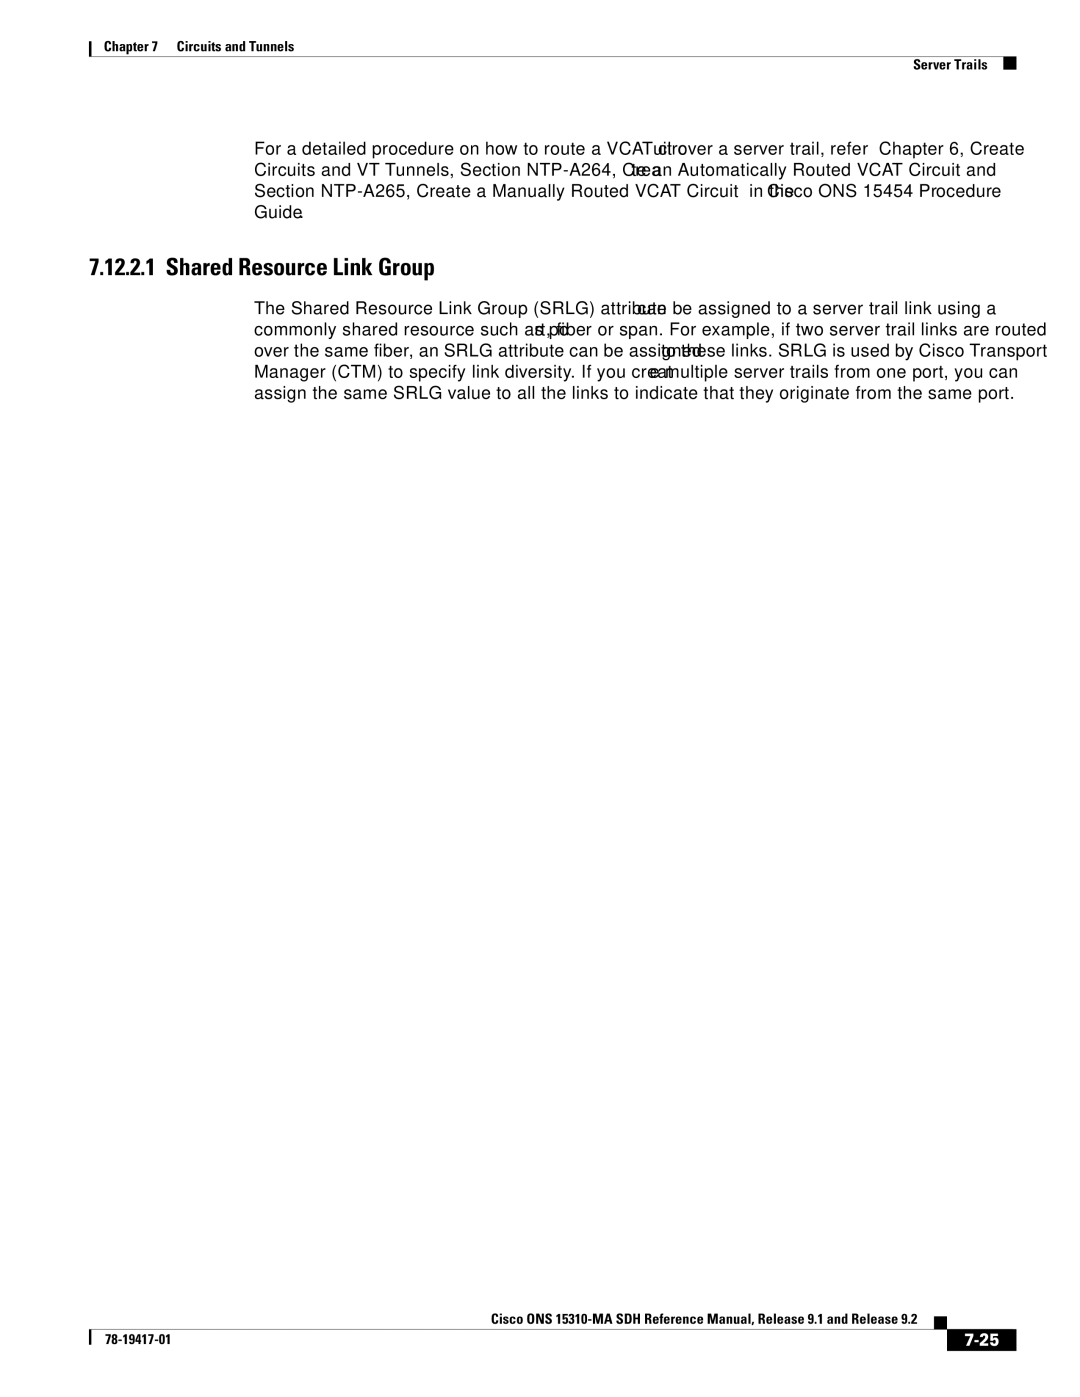 Cisco Systems 15310-MA manual Shared Resource Link Group 